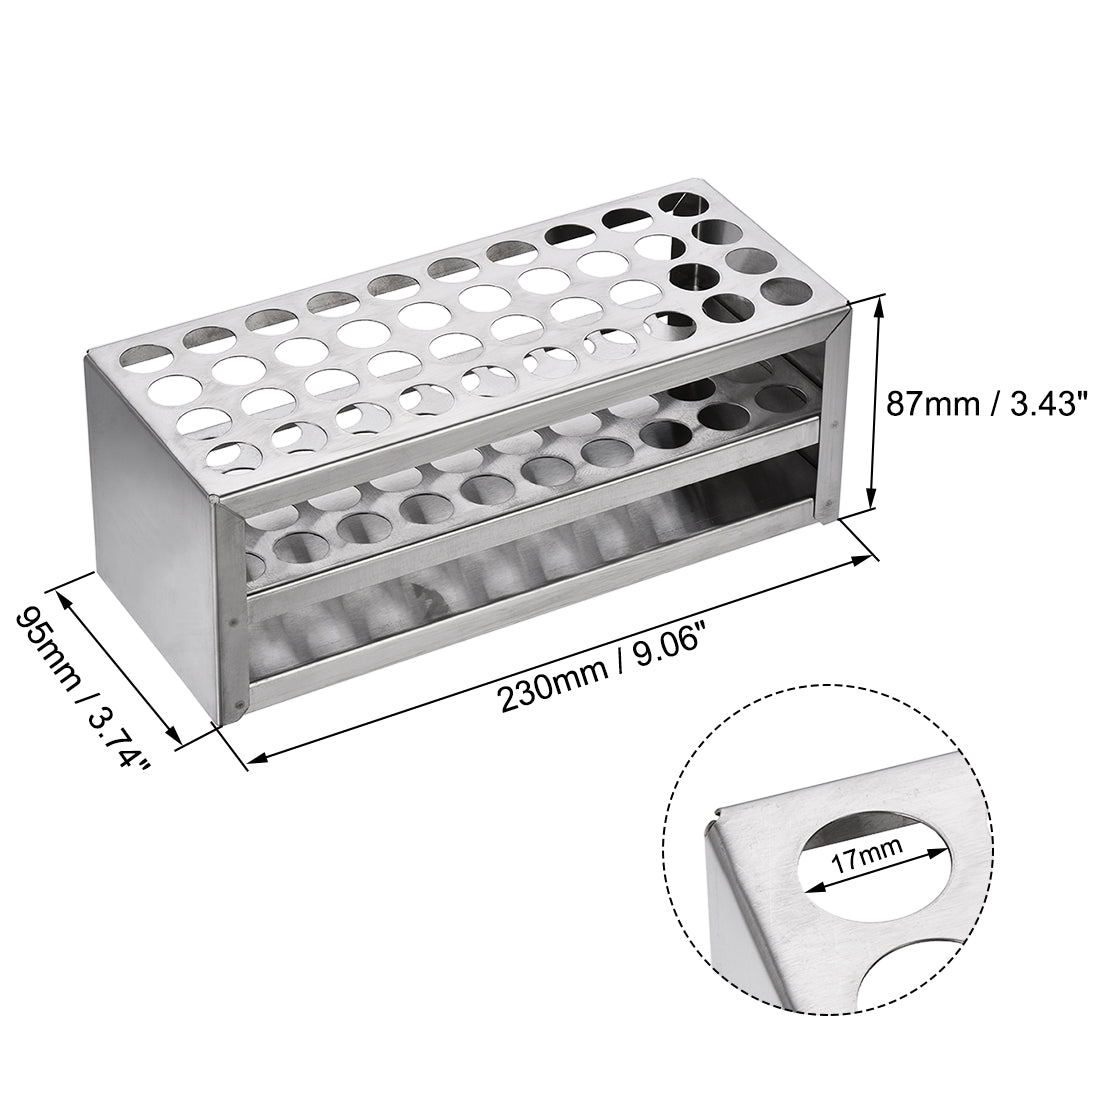 Uxcell Uxcell Stainless Steel Test Tube Holder Rack 40 Hole 3 Layer for 10-13mm Tubes